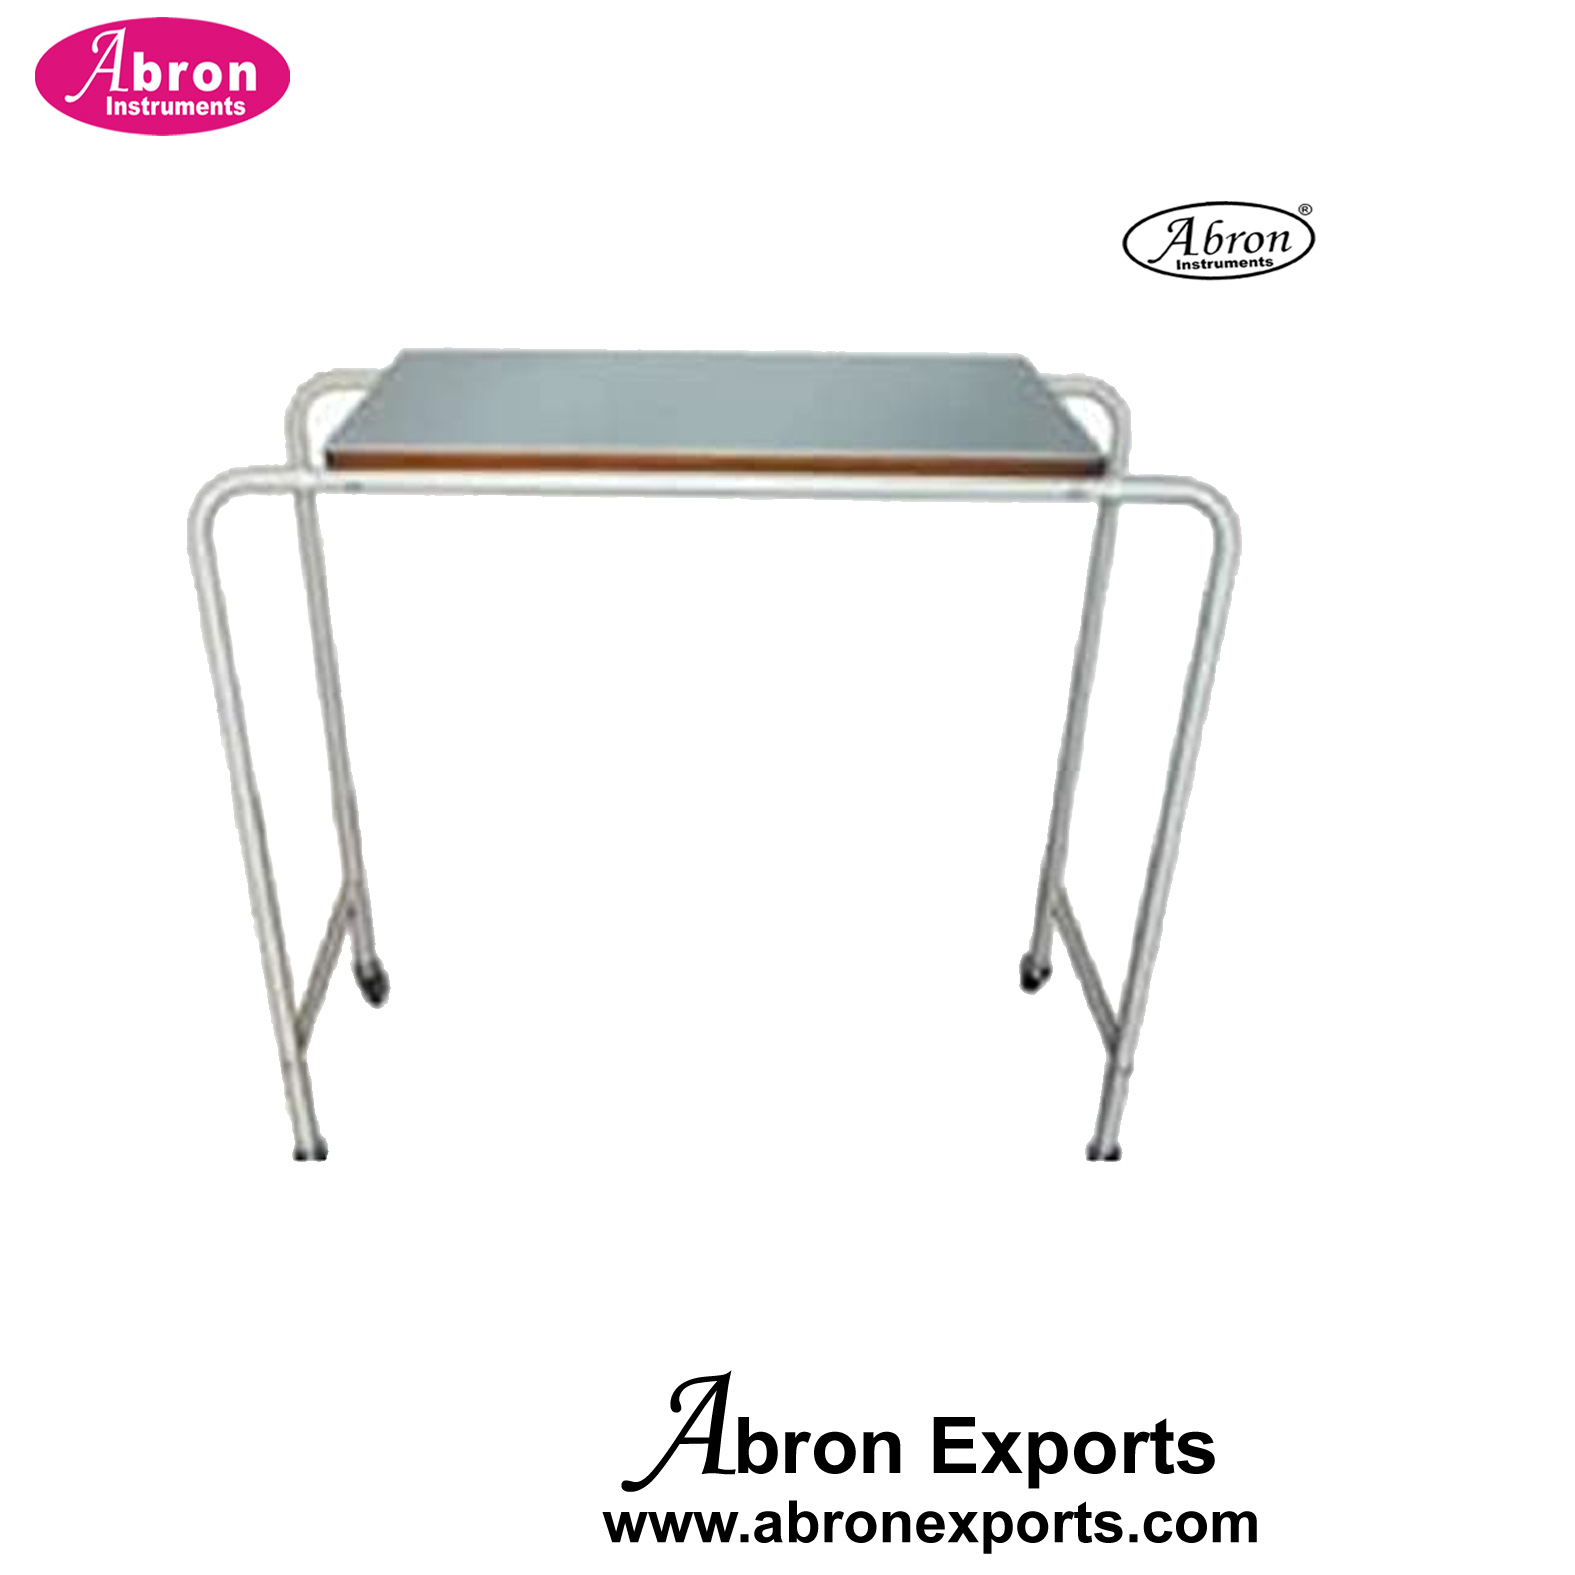 Furniture Overbed Table Multipurpose Trolley Steel Frame Tabletop for Patients and Hospital Bed Abron ABM-2351S 